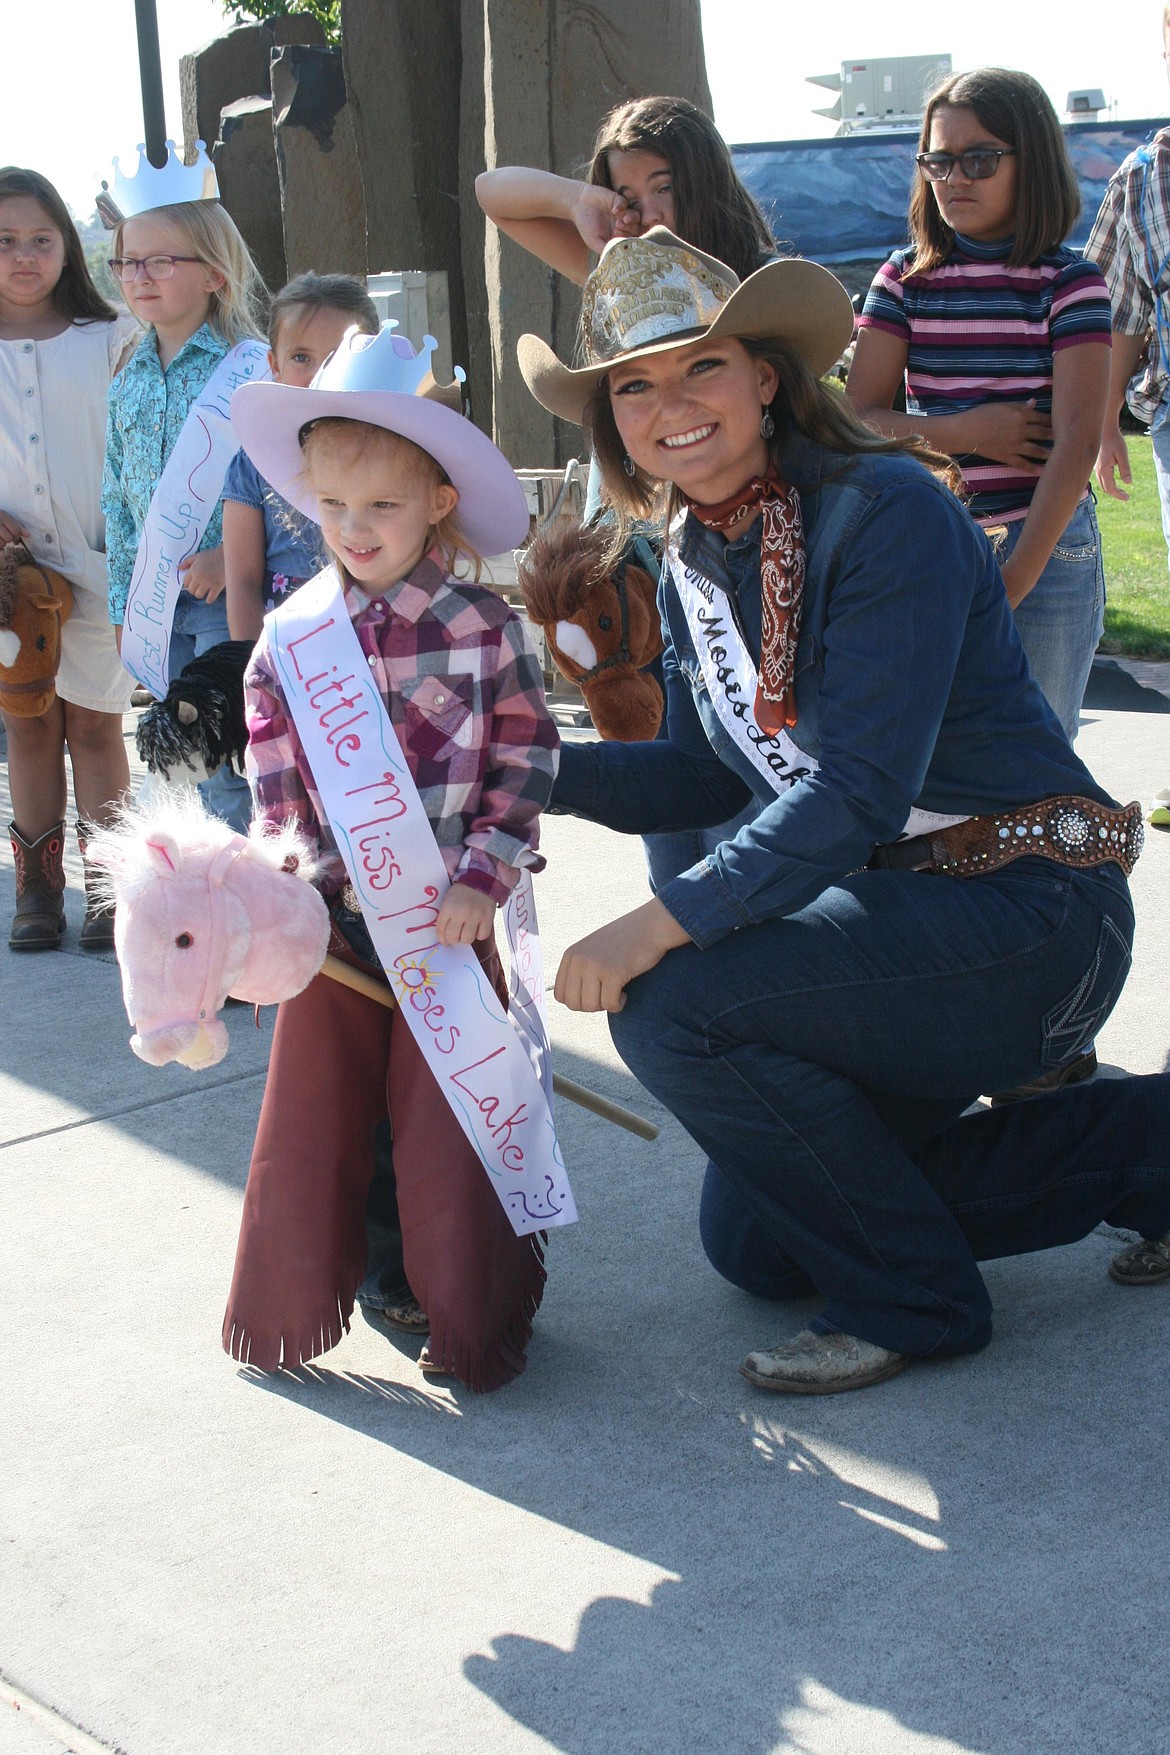 Harper Carey, queen of the Pee Wee Stampede, poses for a picture with Miss Moses Lake Roundup Brianna Kin Kade.